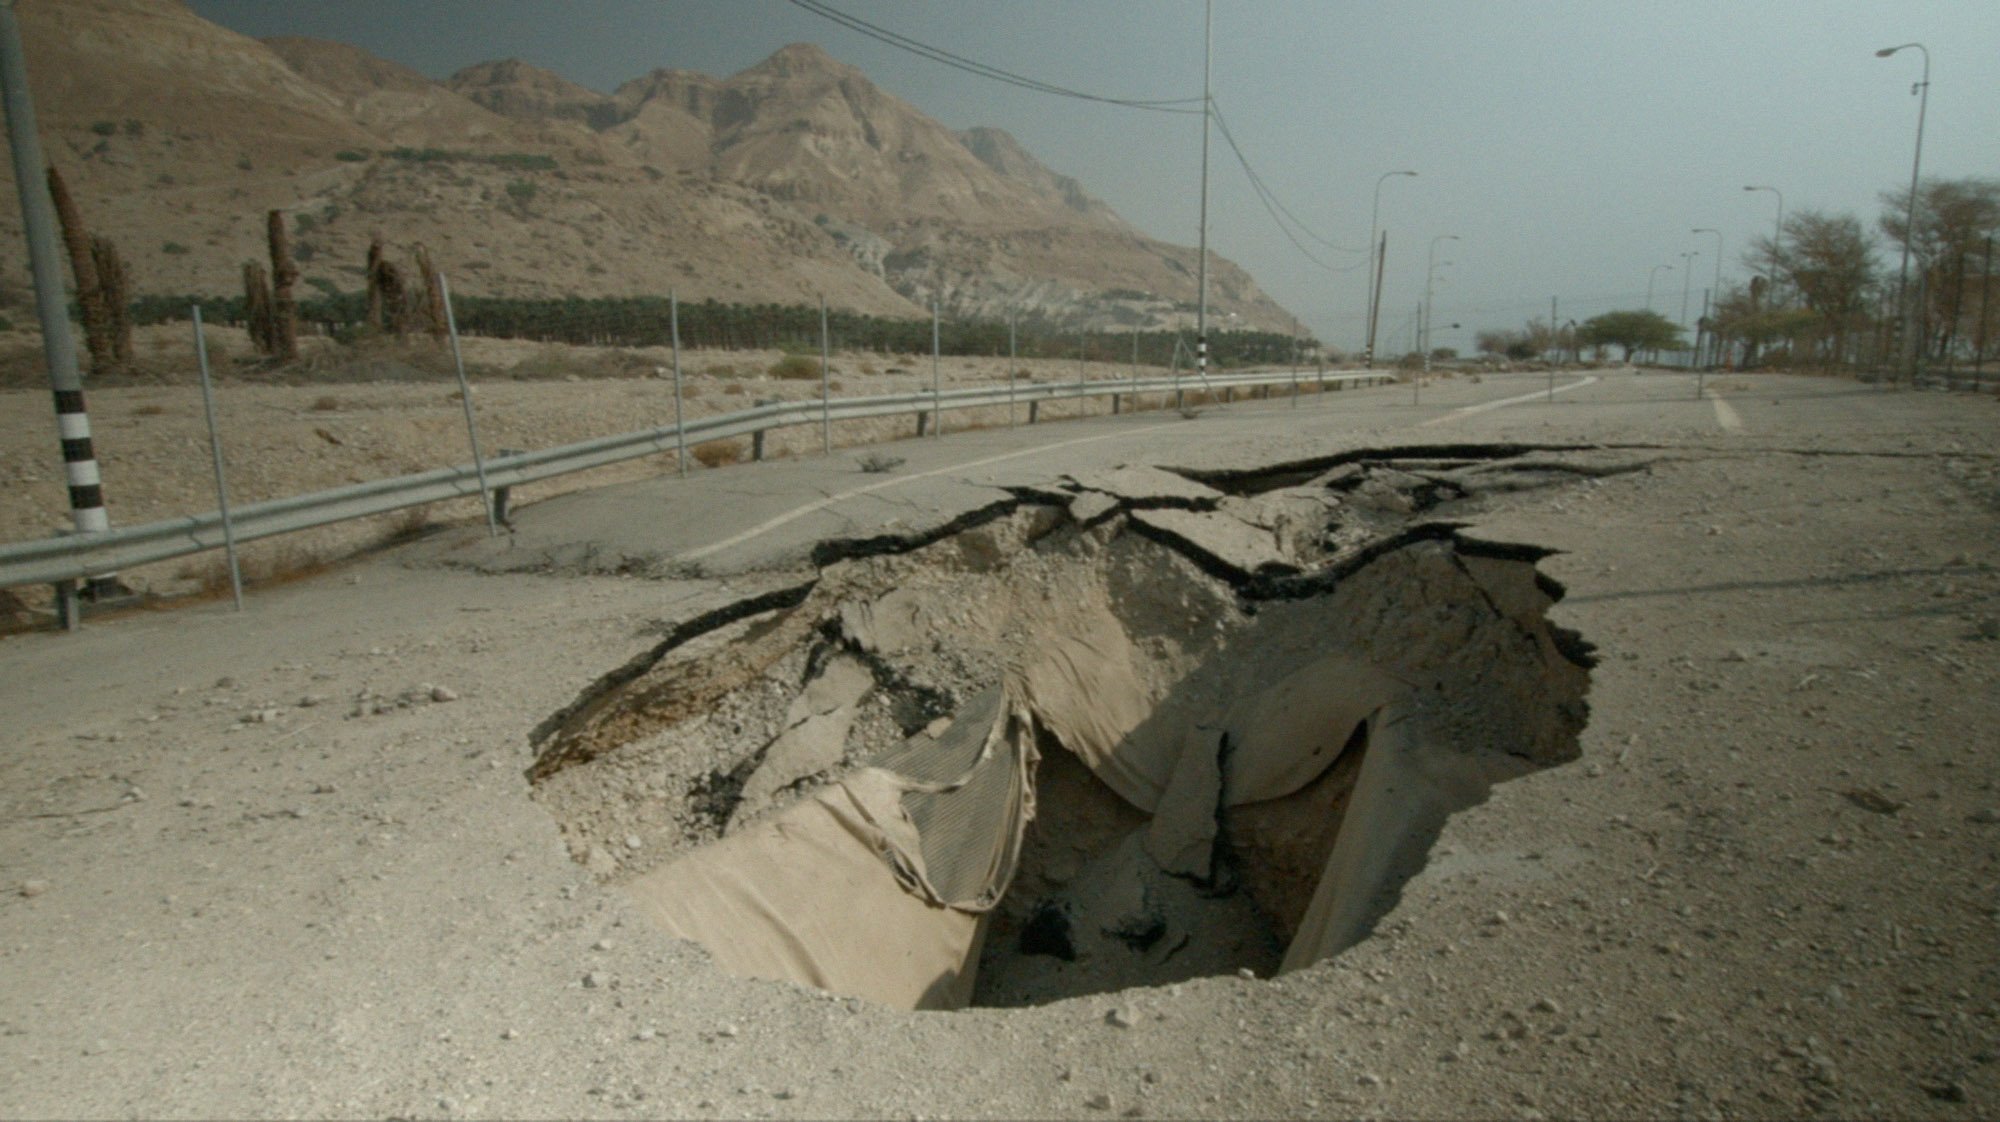 a sinkhole in a road, a still image from the film Salarium